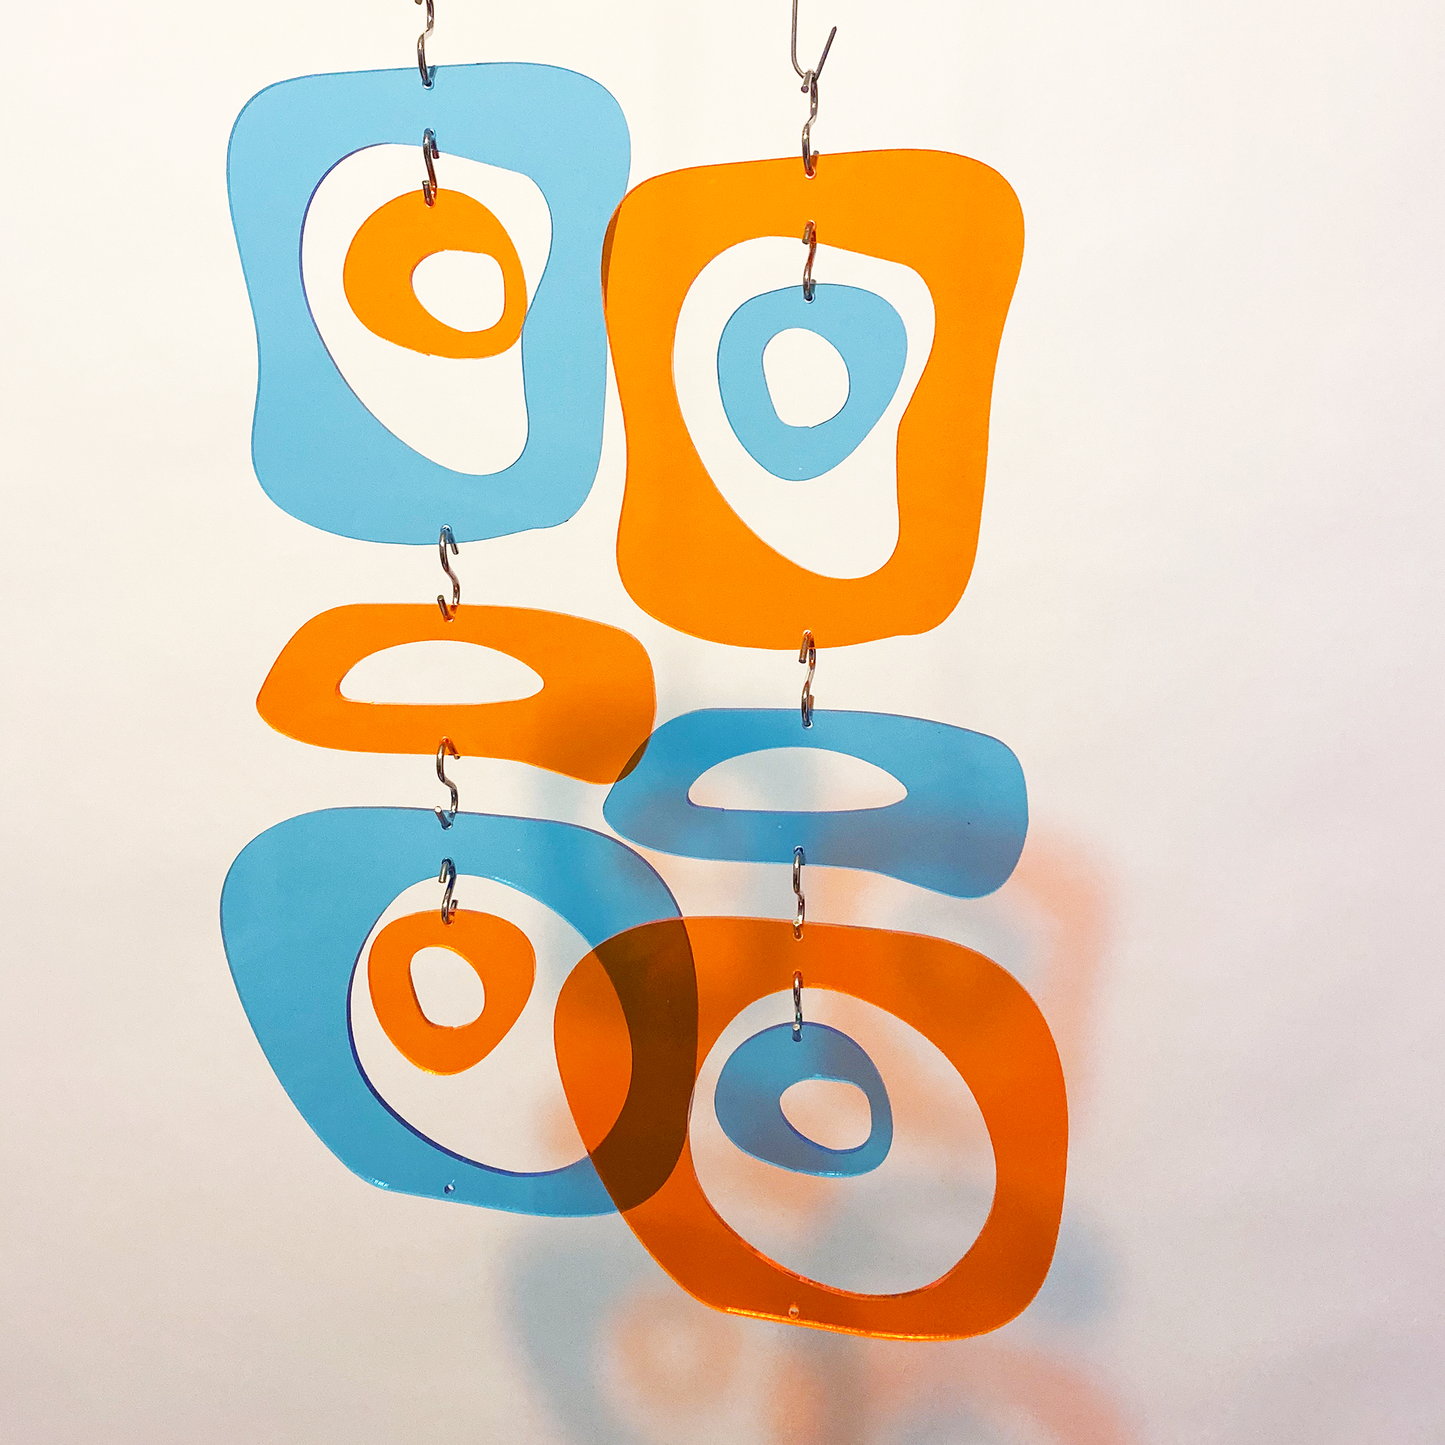 Clear Acrylic Orange and Blue Retro Room Divider, Curtain, Wall Art, and Mobiles by AtomicMobiles.com